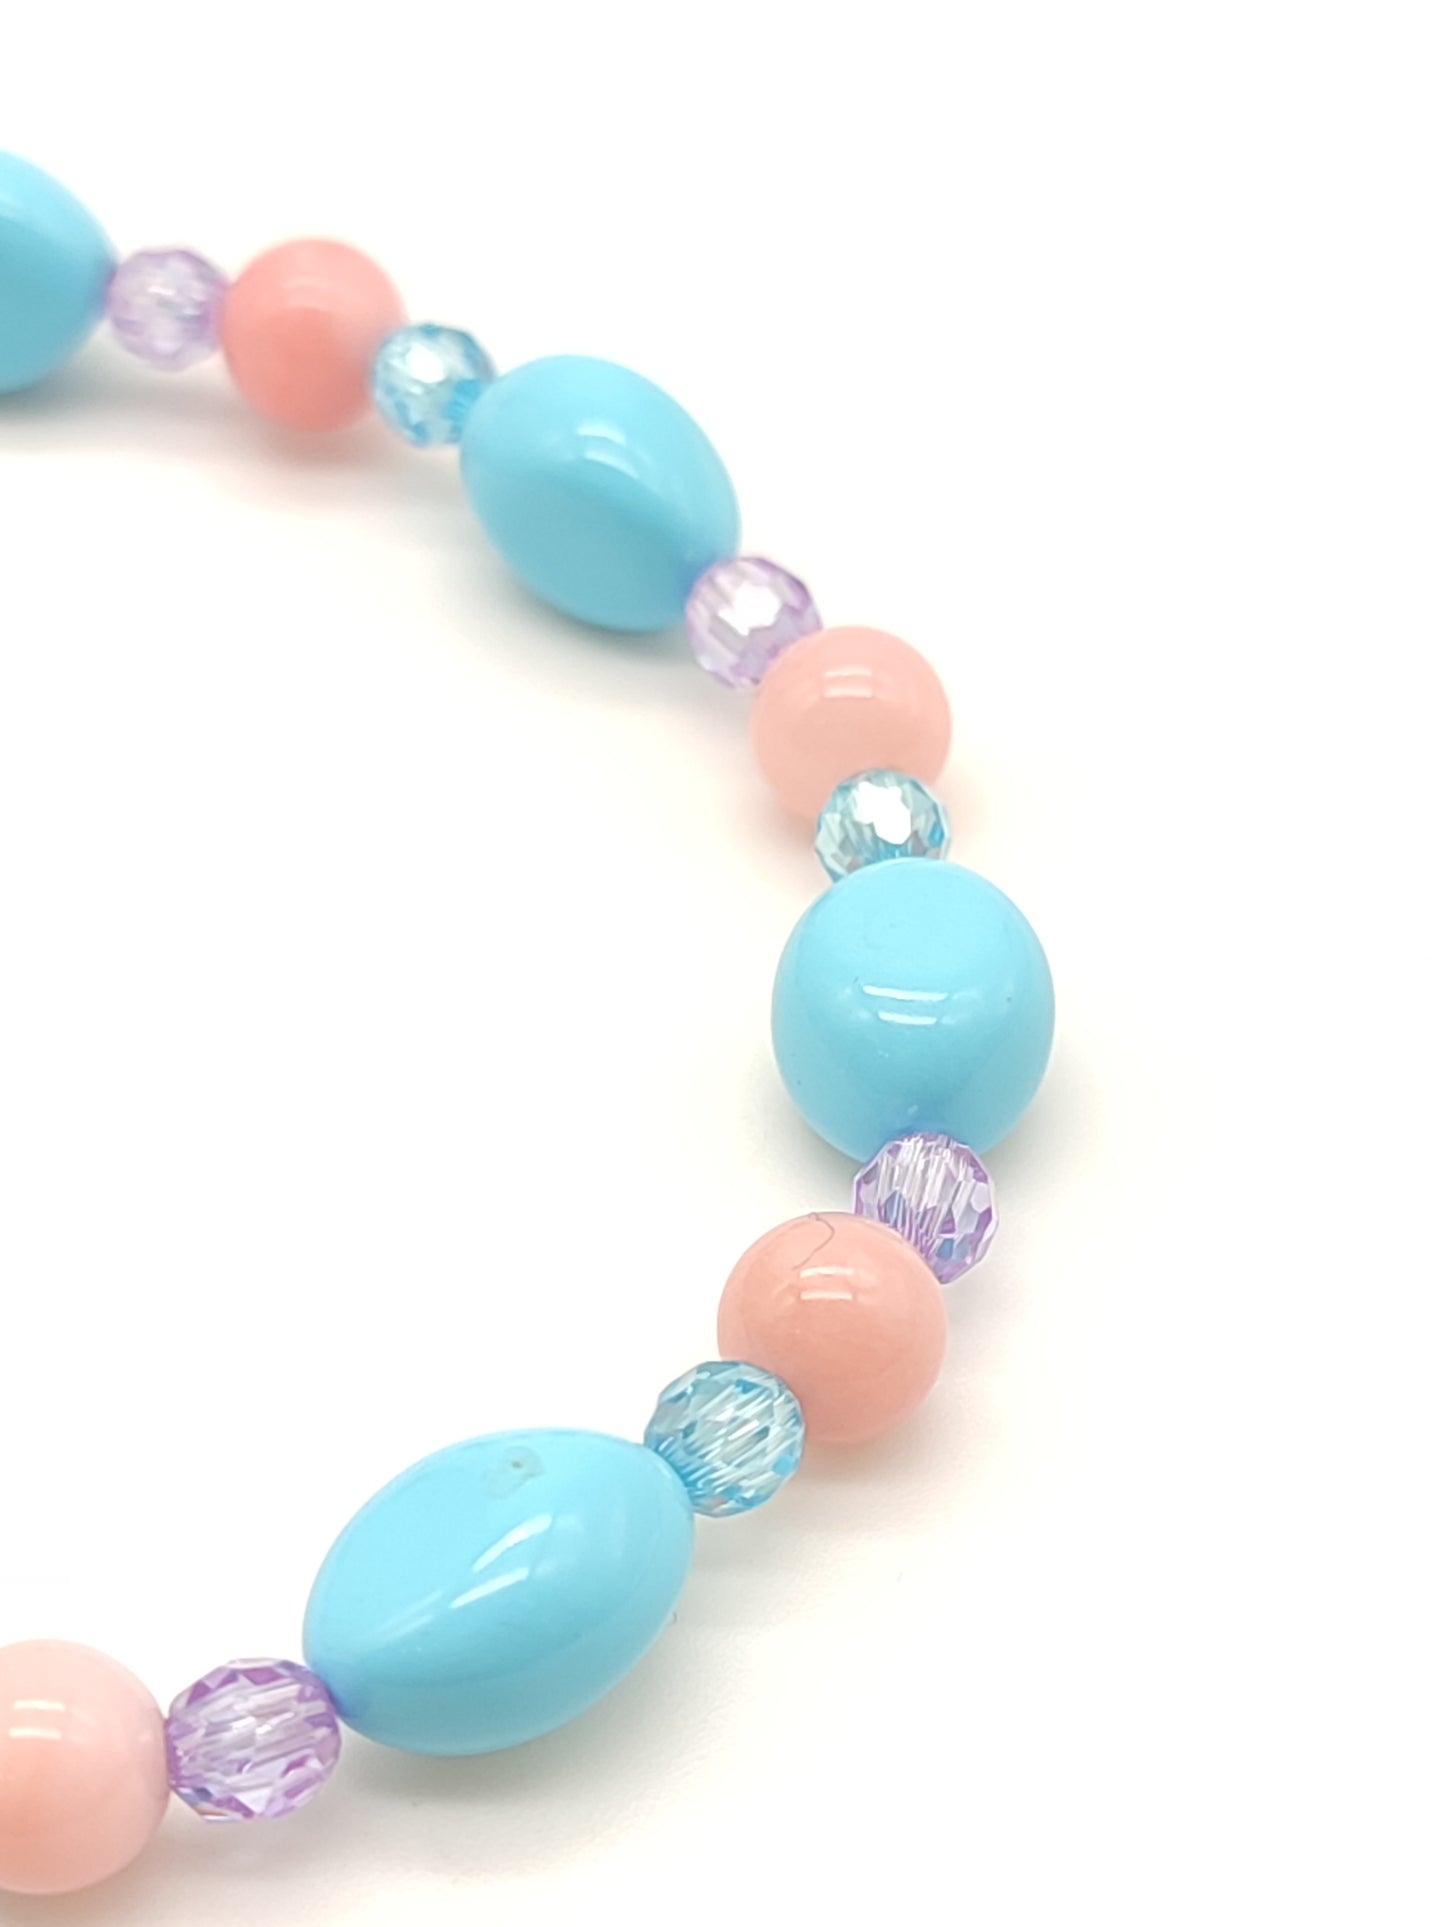 Sea bracelet with turquoises and corals